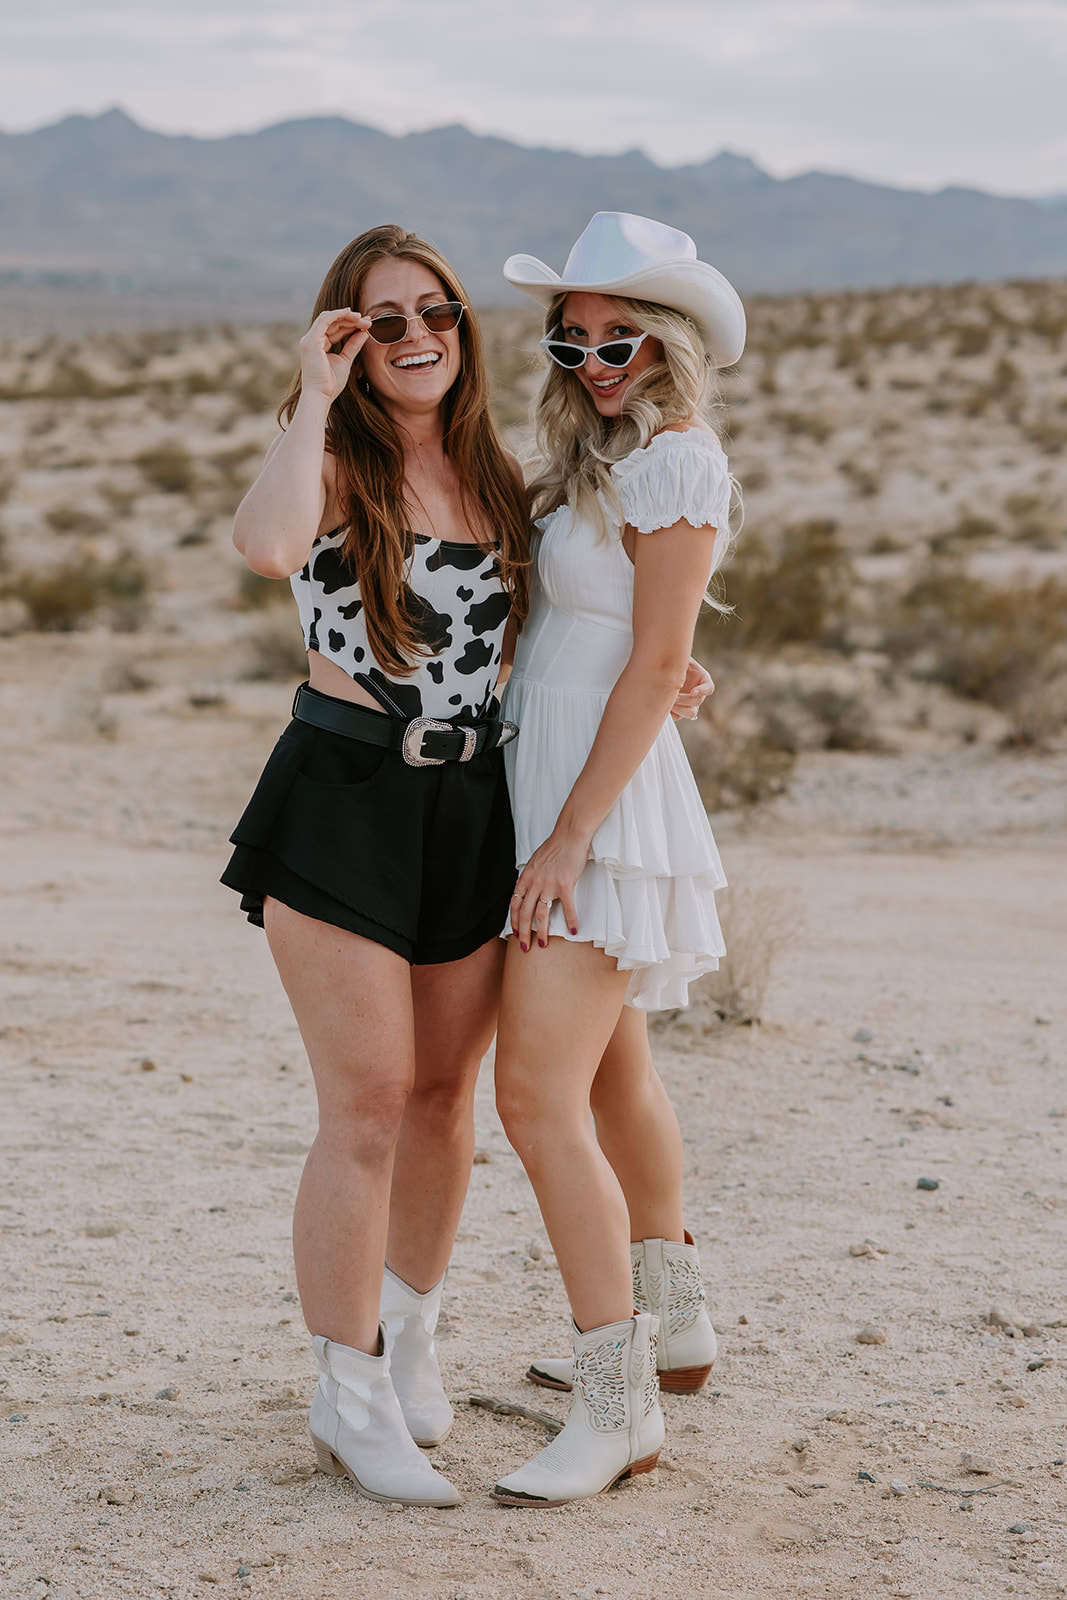 Bride posed with one of her bridesmaids in the desert during her bachelorette party